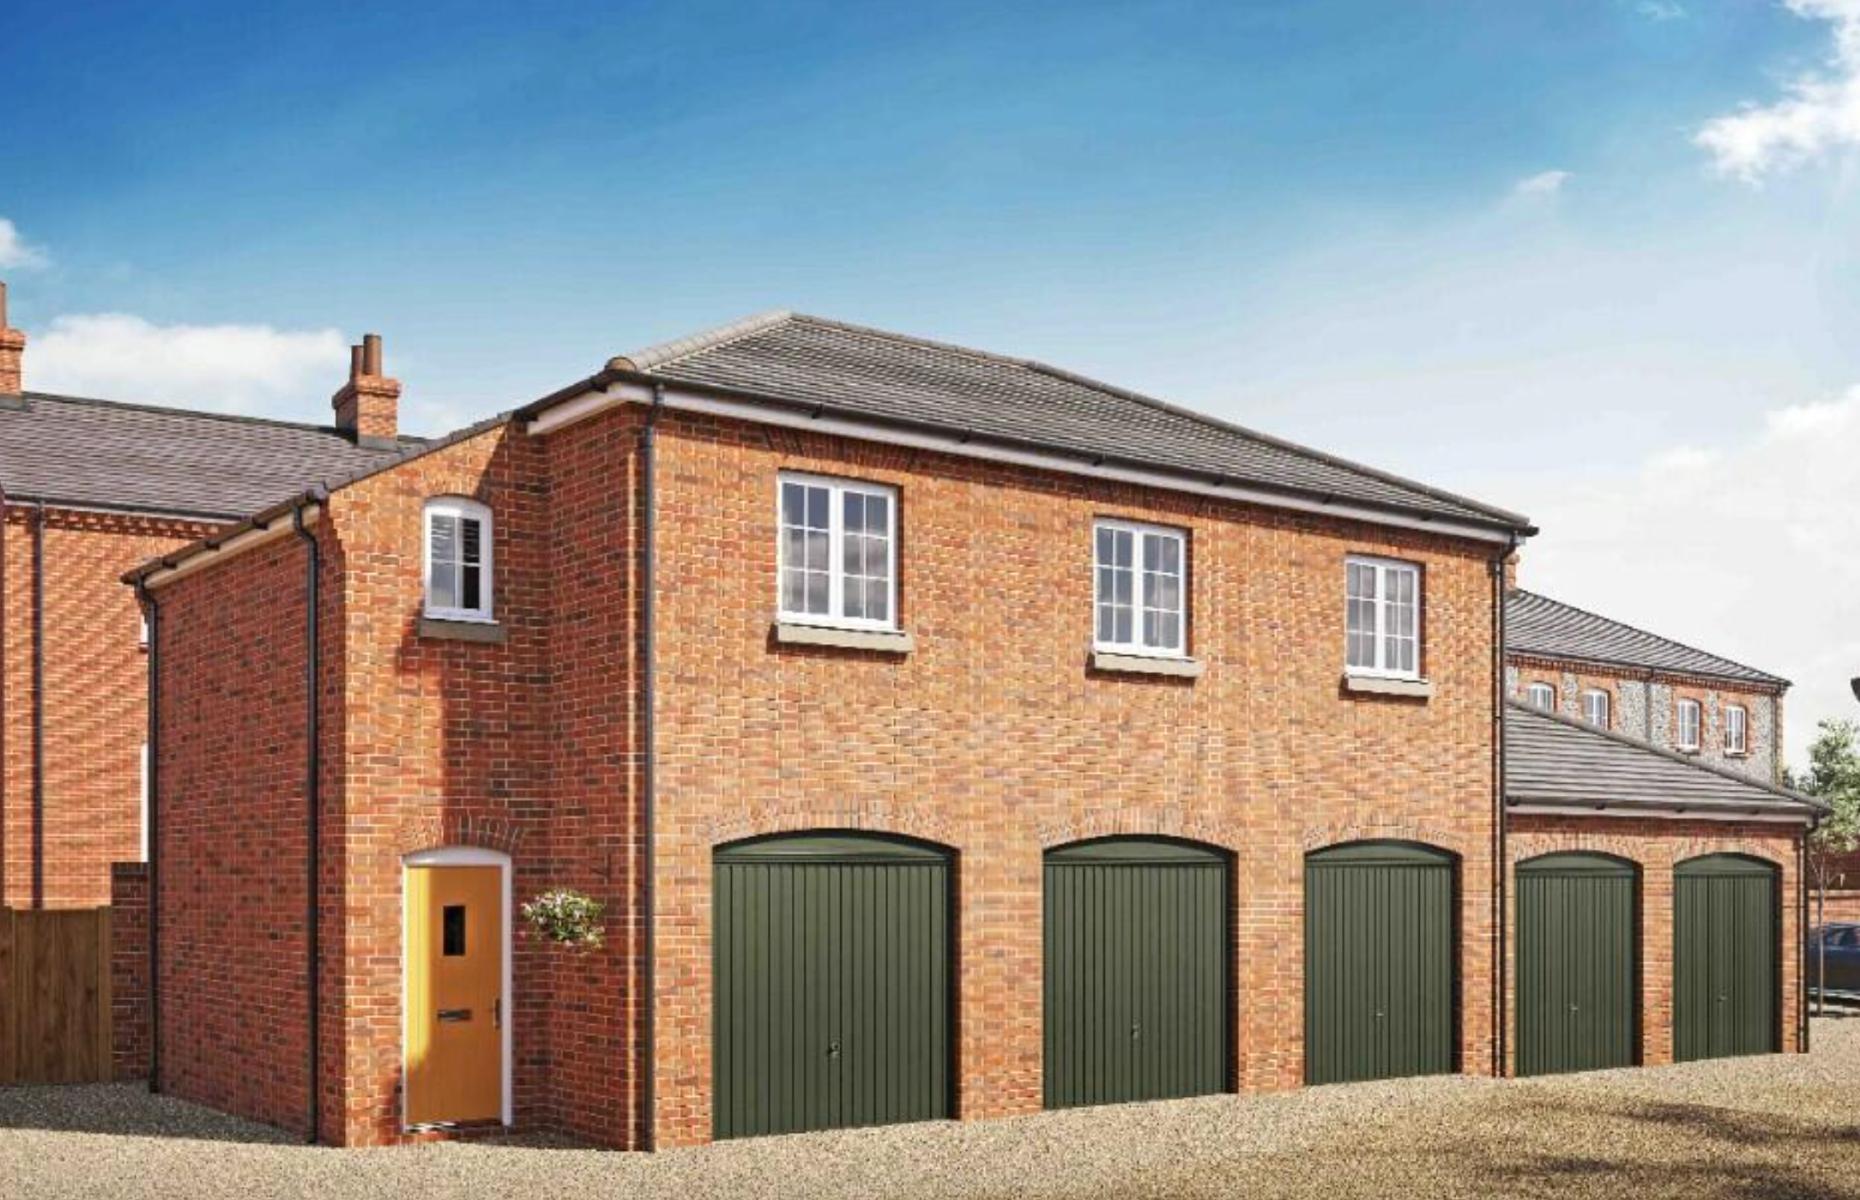 <p>For the less well-heeled, there’s this very reasonably priced coach house, which is currently under construction in the final North-East Quadrant of the town and listed at just <a href="https://www.rightmove.co.uk/properties/135623660#/?channel=RES_NEW">£300,000</a> ($375k). It has two double bedrooms and a contemporary bathroom. The average price for a flat in Poundbury in 2022 was £235,000 ($294k), while you could pick up a terraced house for around £503,000 ($630k).</p>